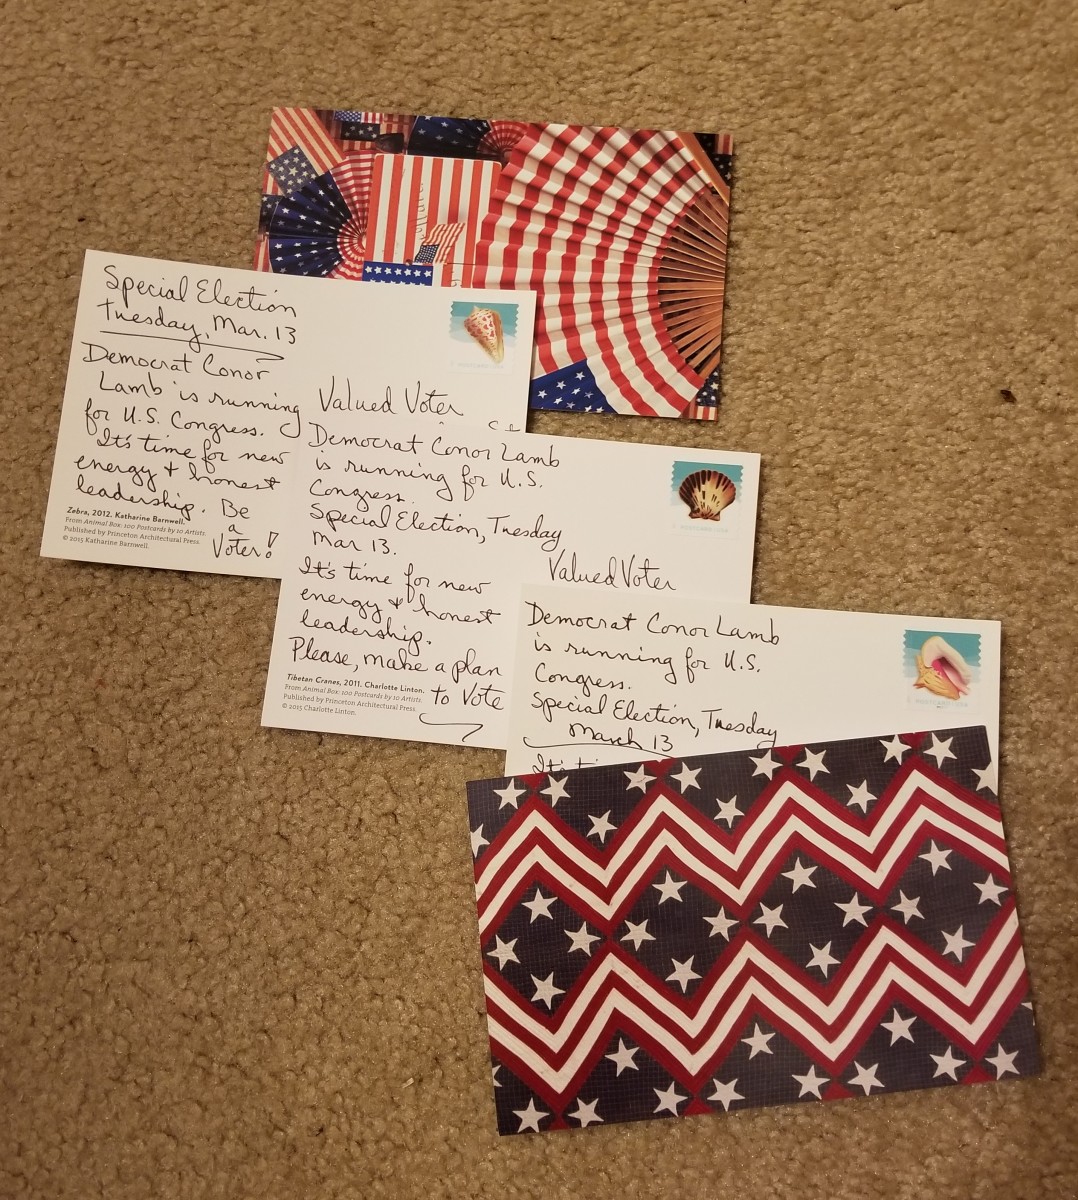 Using Postcards for Political Action